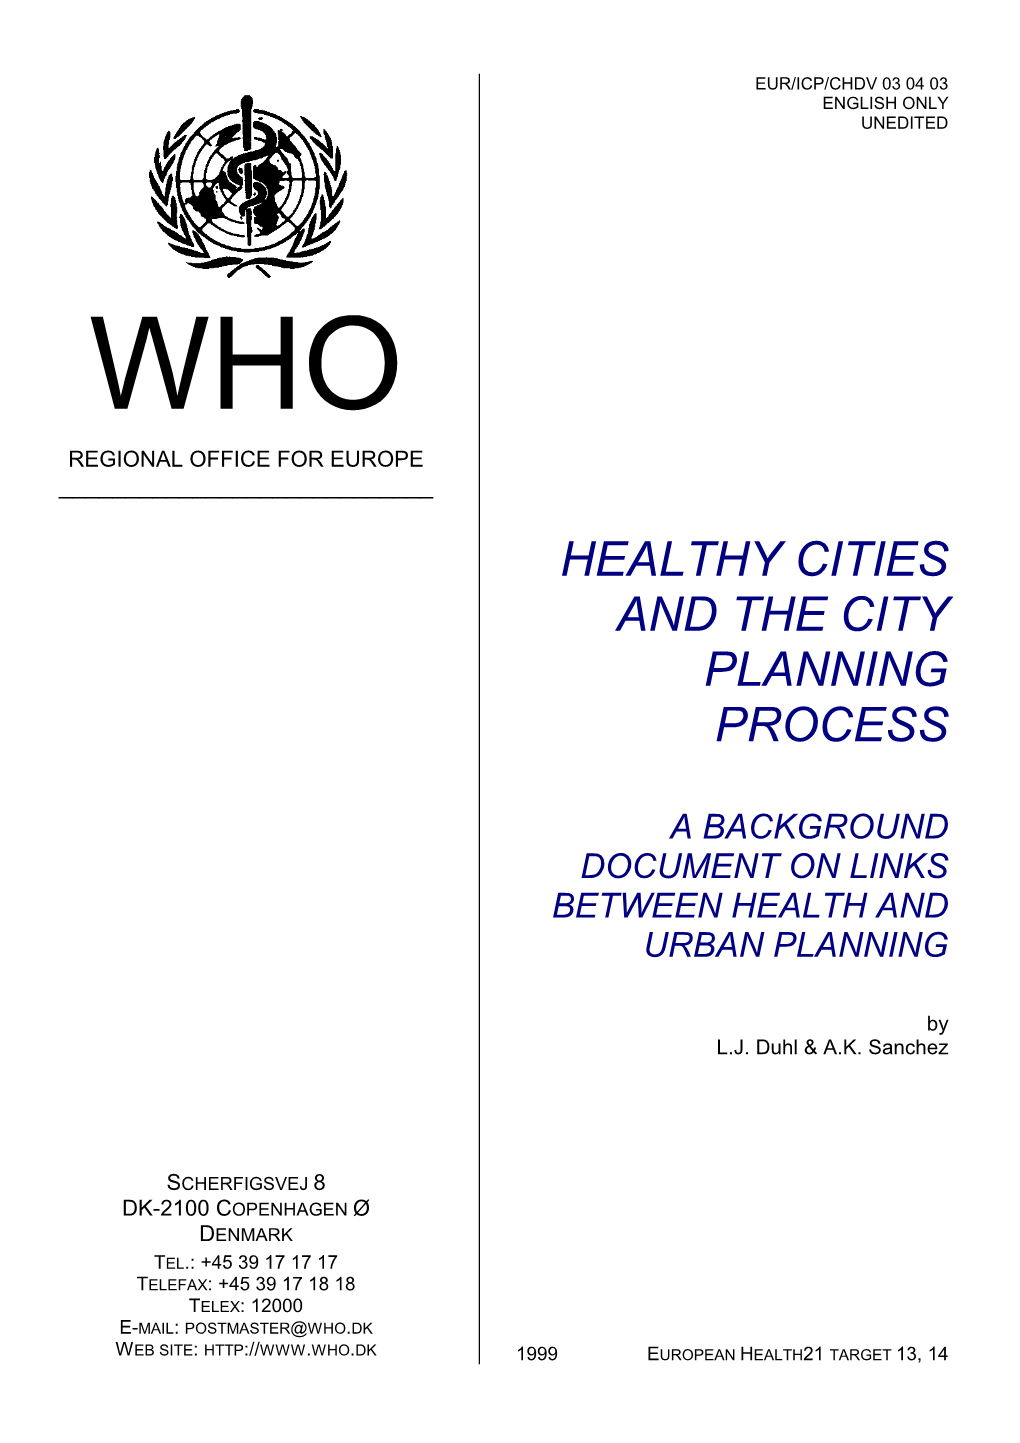 Healthy Cities and the City Planning Process: a Background